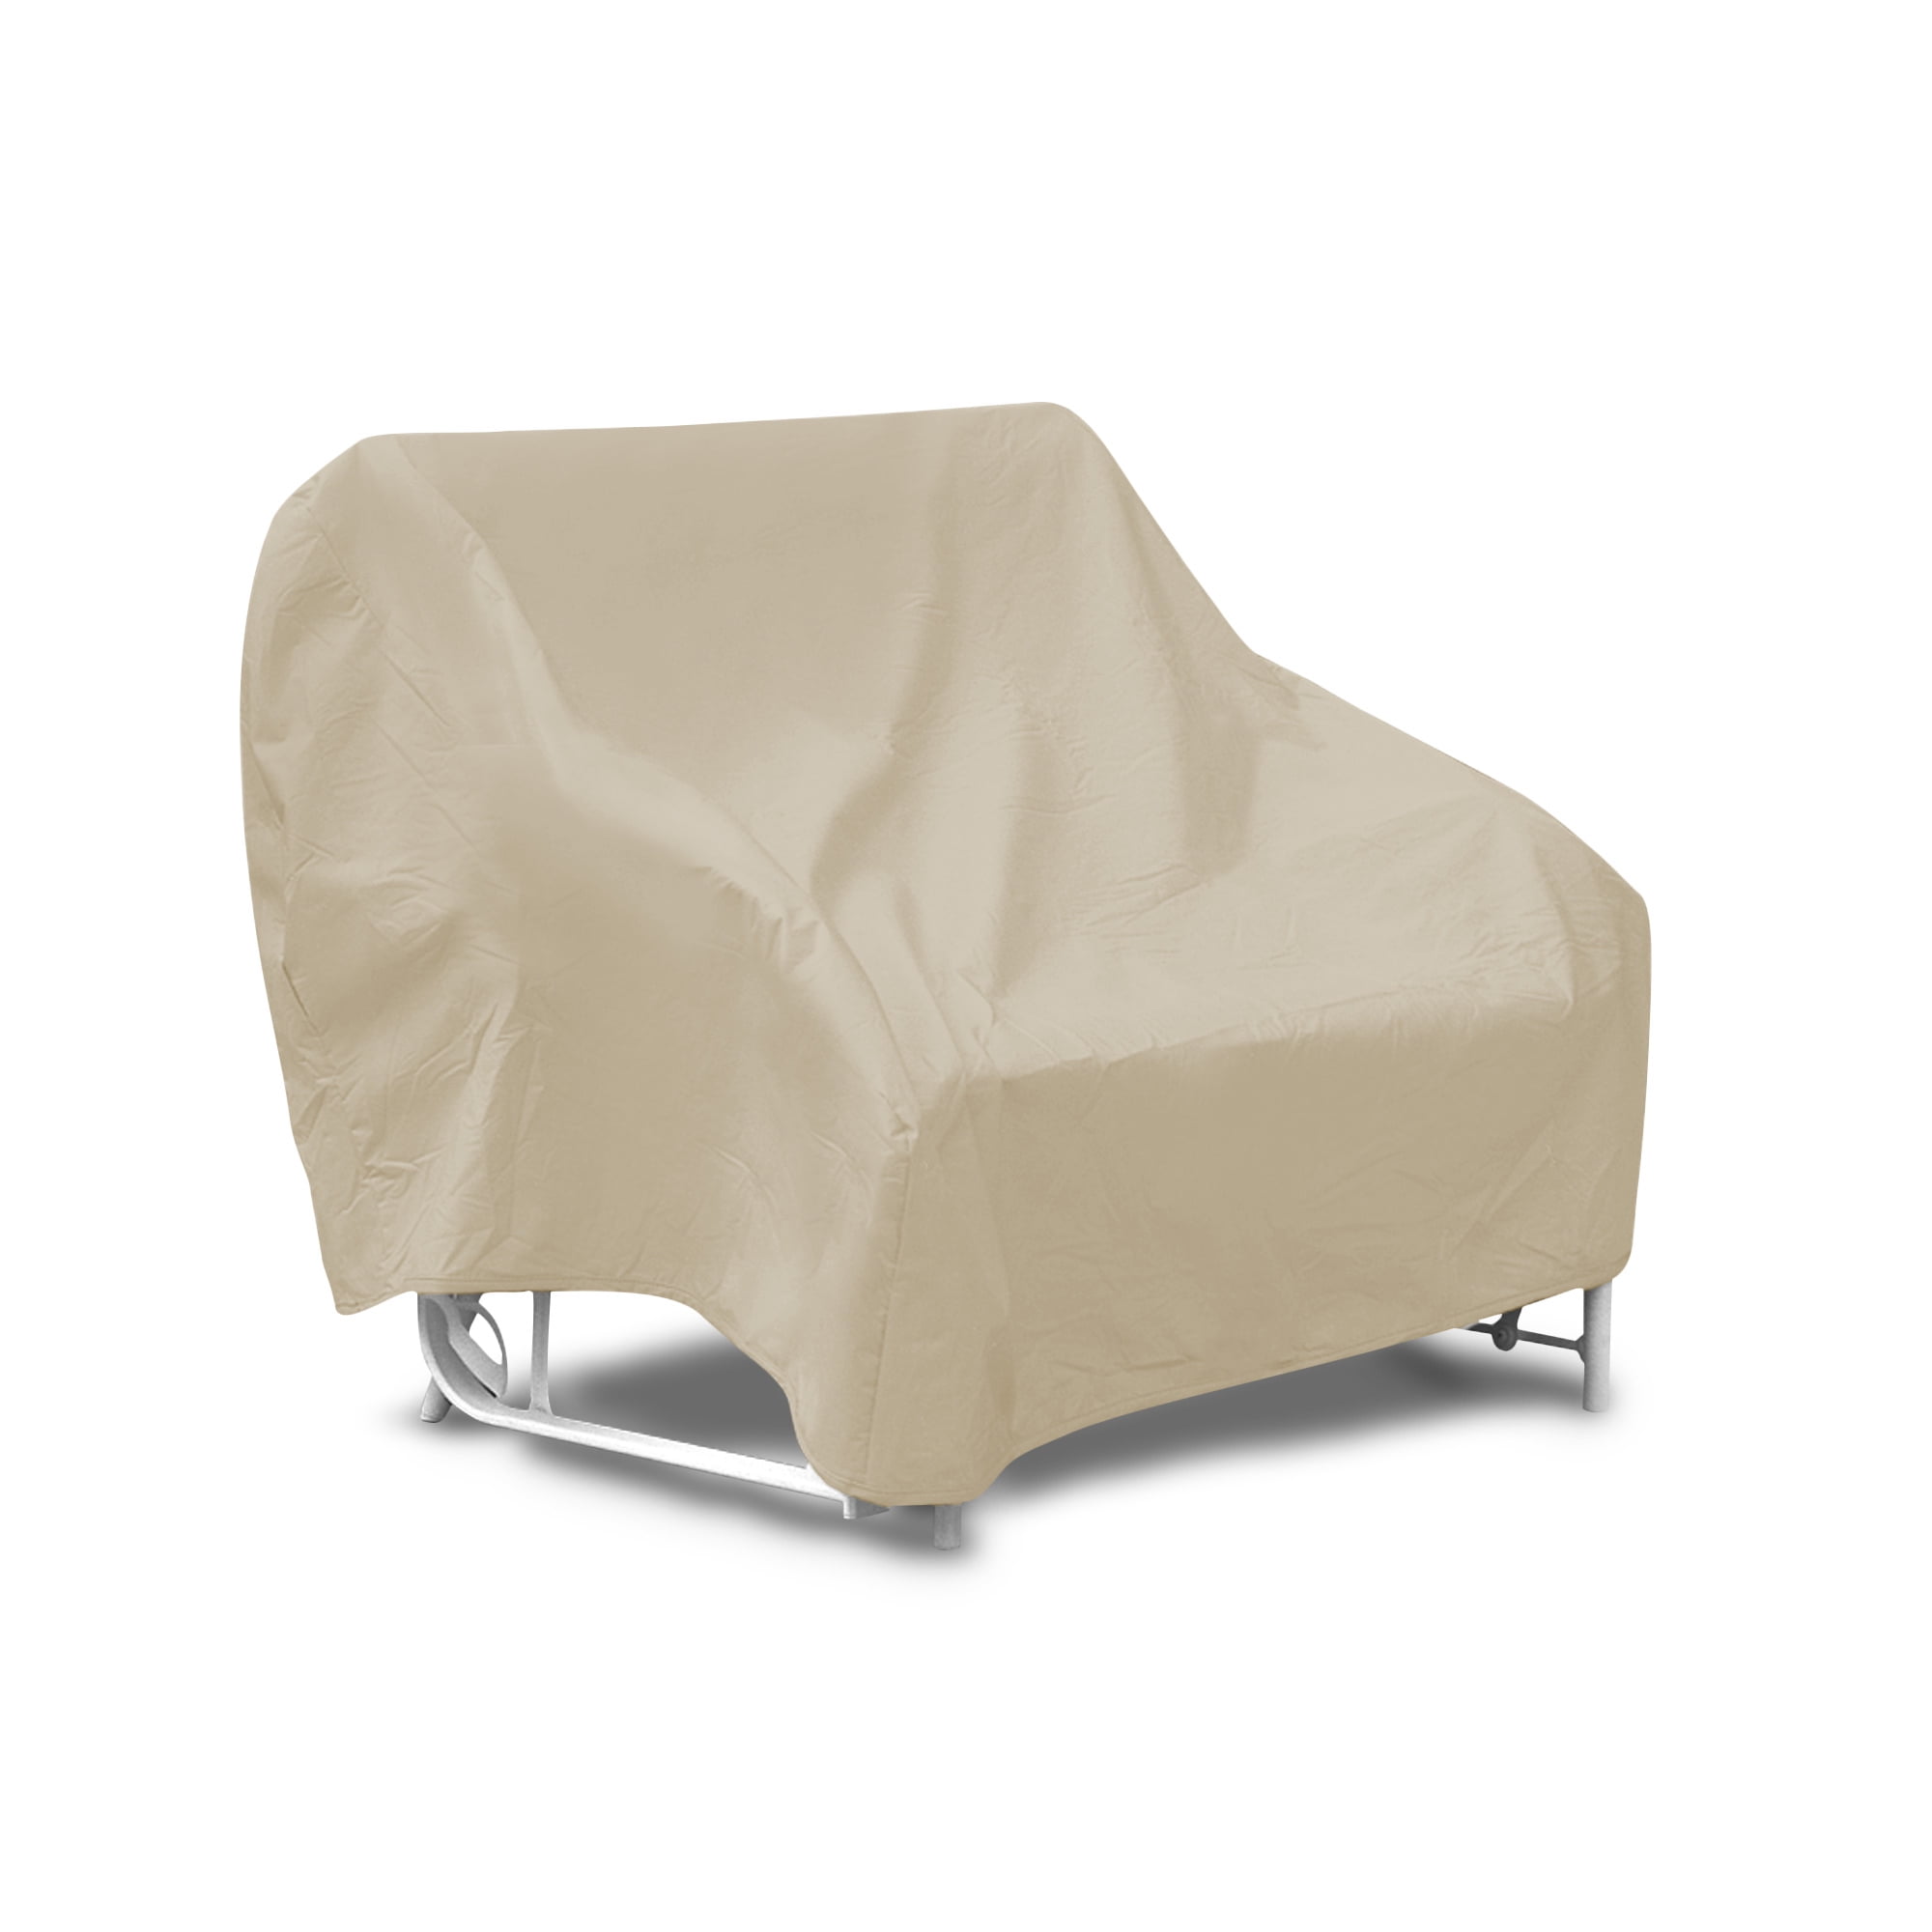 #1166 2 SEAT GLIDER PROTECTIVE COVERS INC 